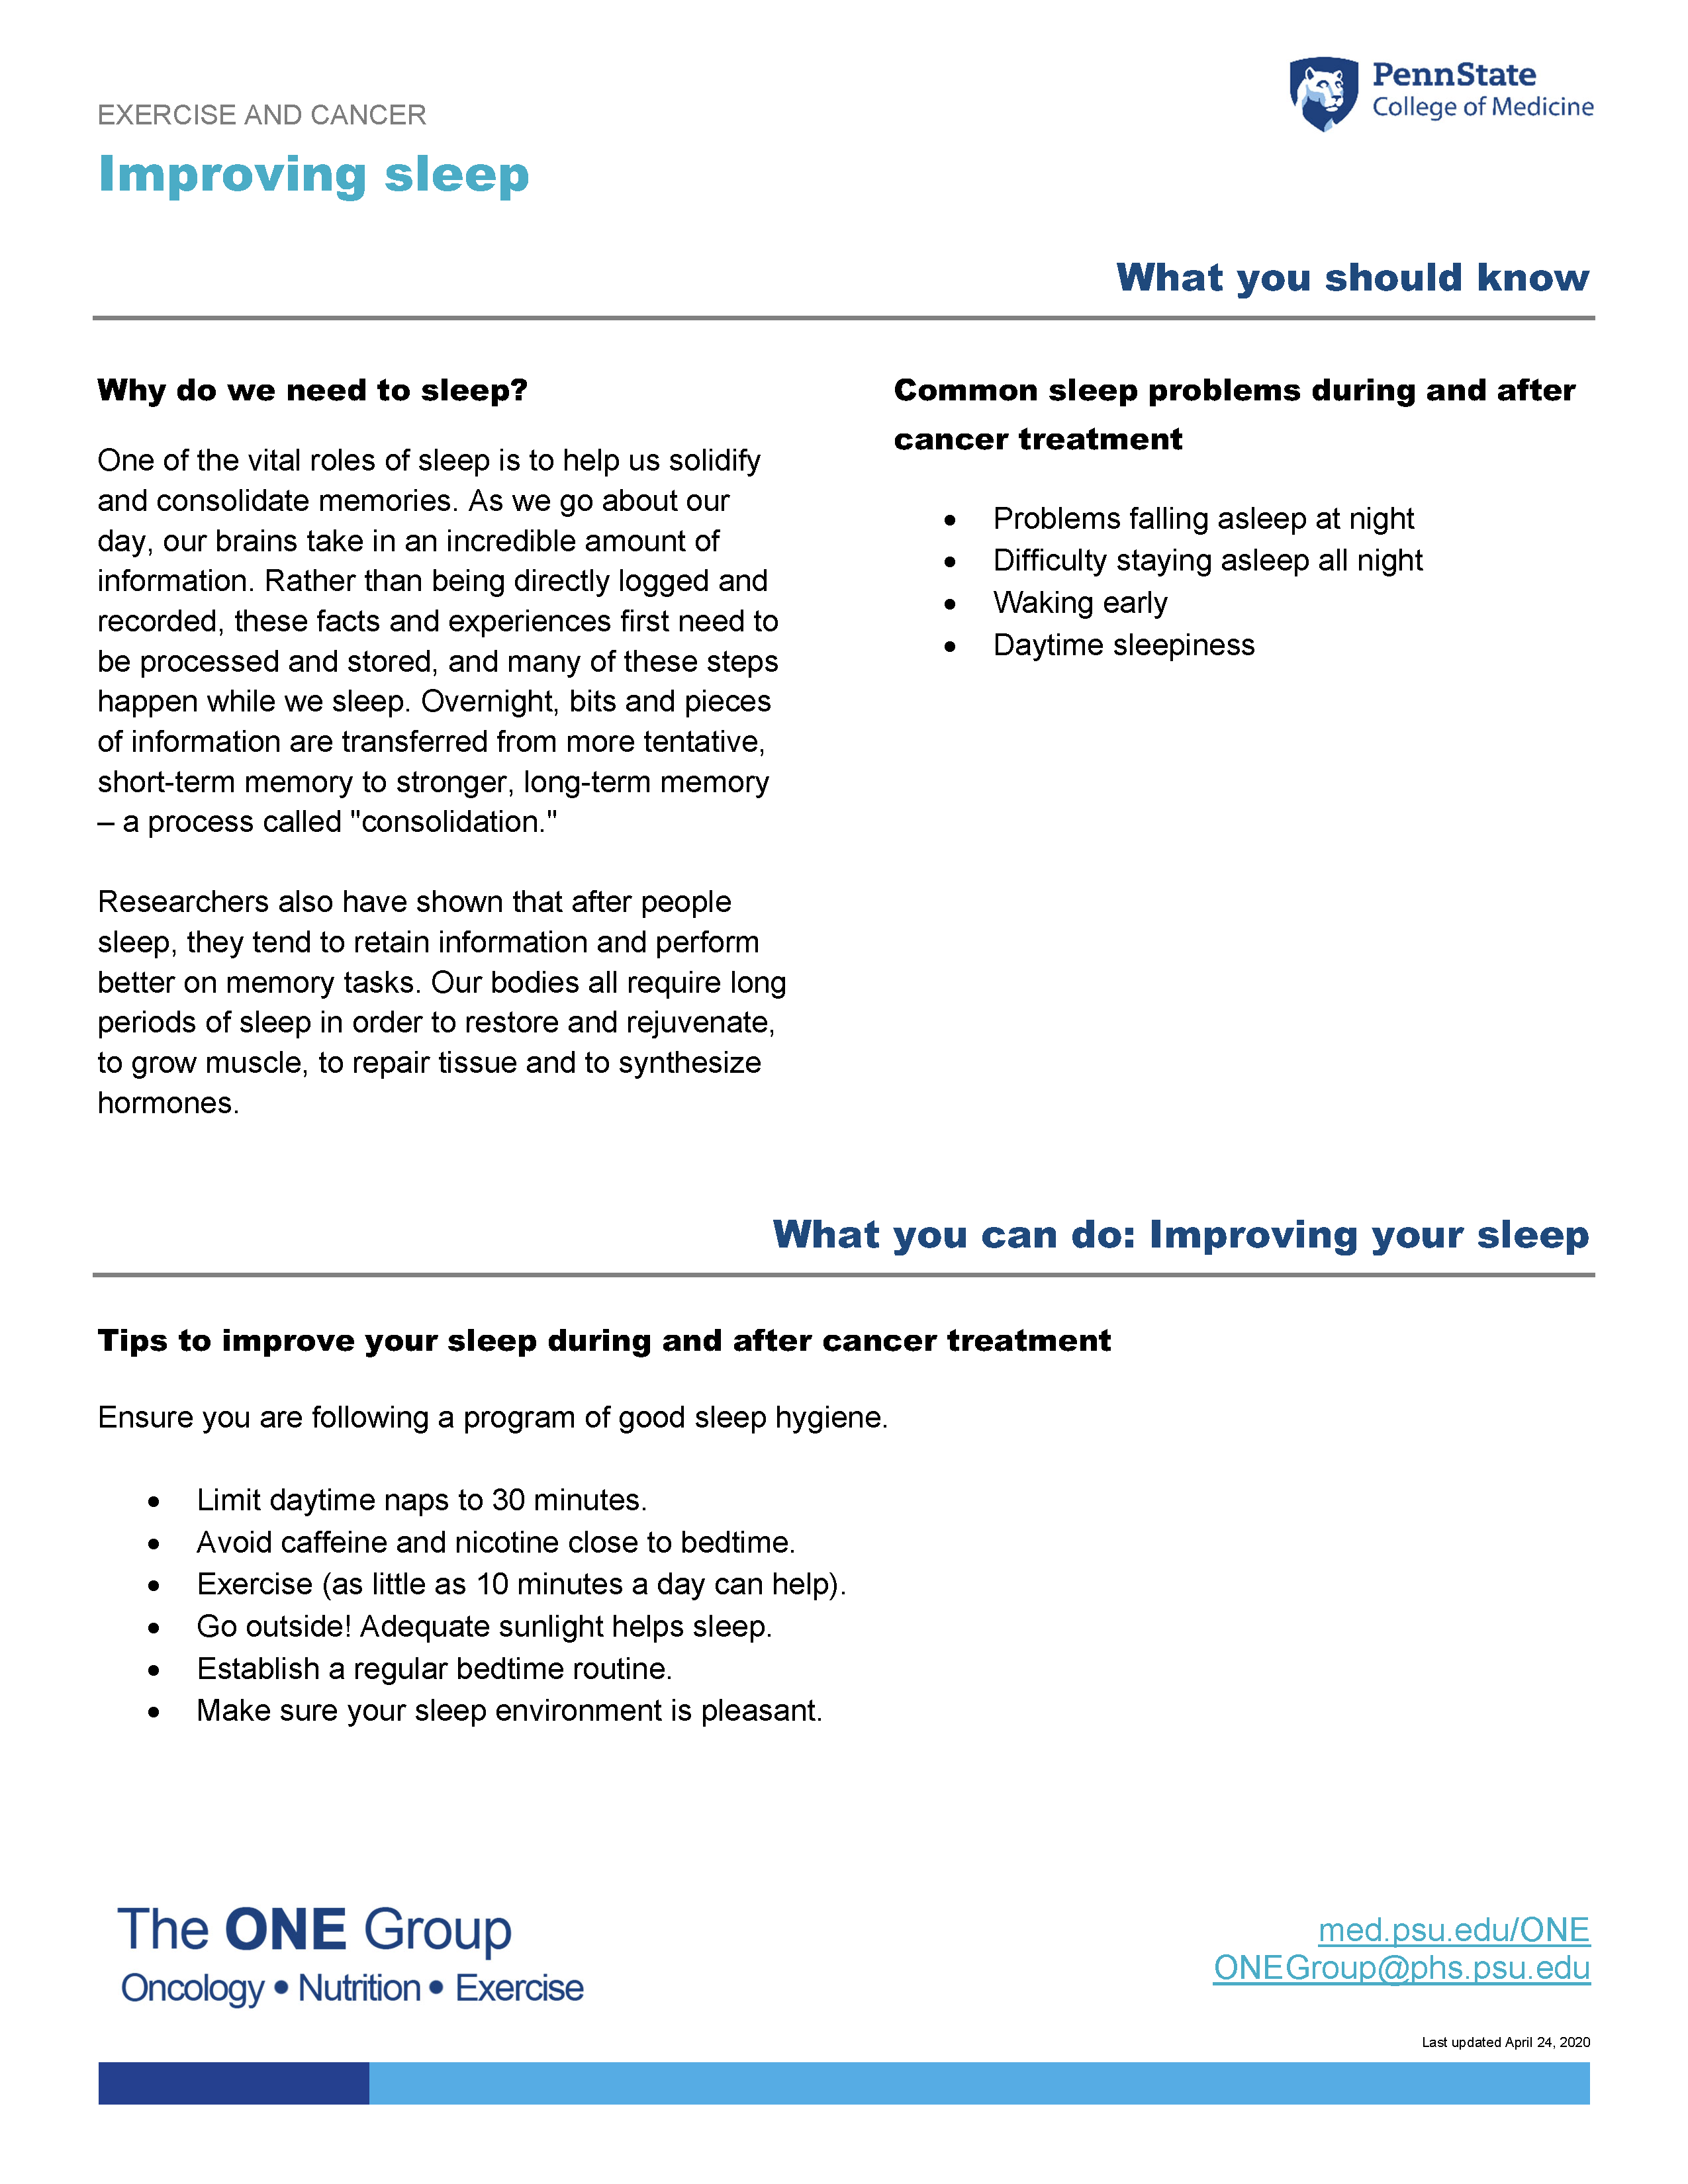 The improving sleep guide from The ONE Group includes the information on this page, formatted for print.